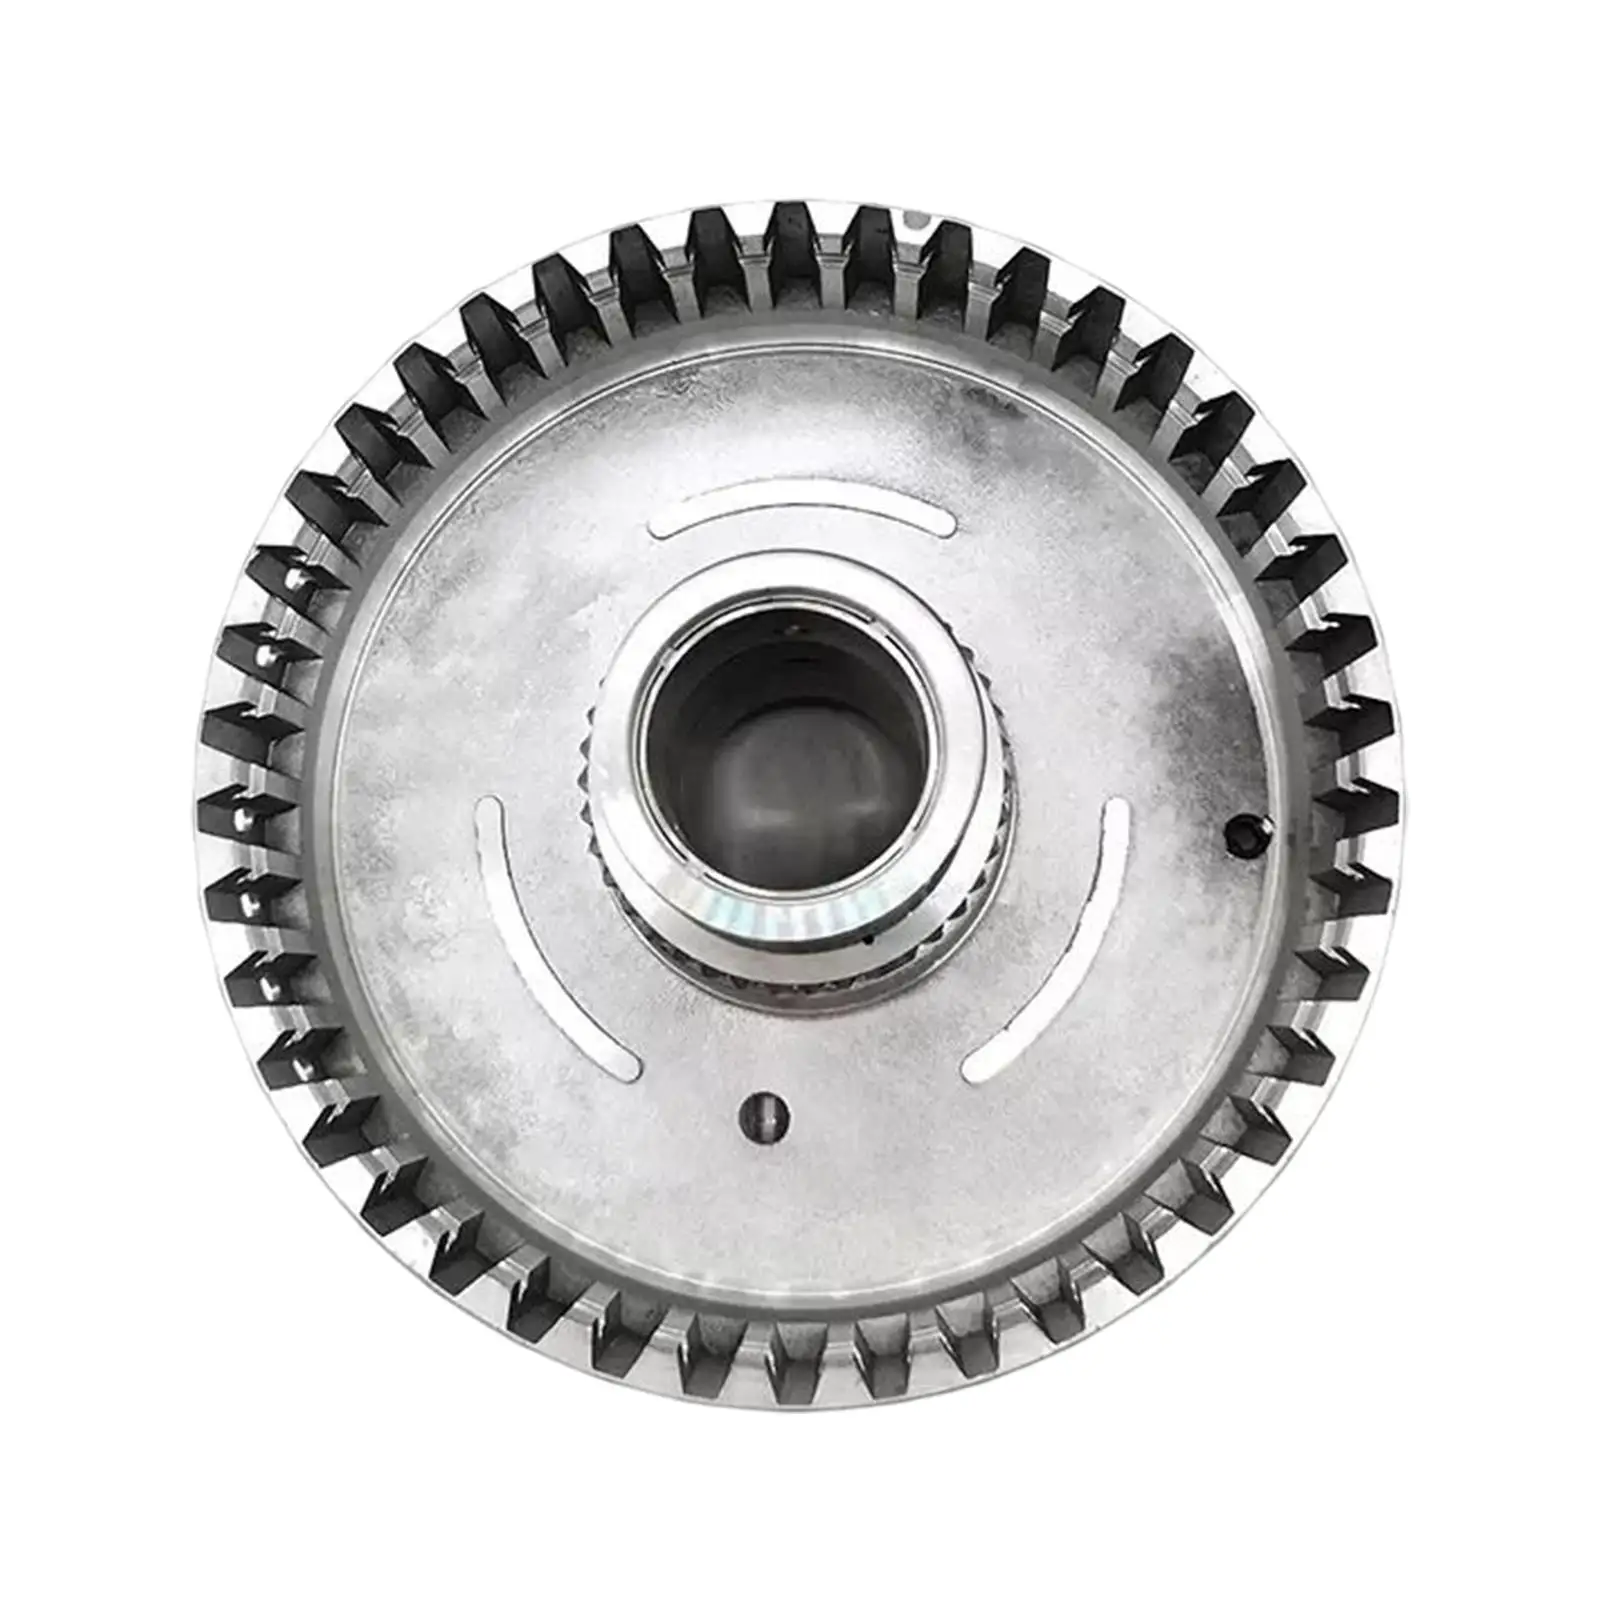 Car Clutch Auto Transmission Low Drum 1328157Ka-Qx Metal Material Accessories Practical Replacement Simple to Install Sturdy